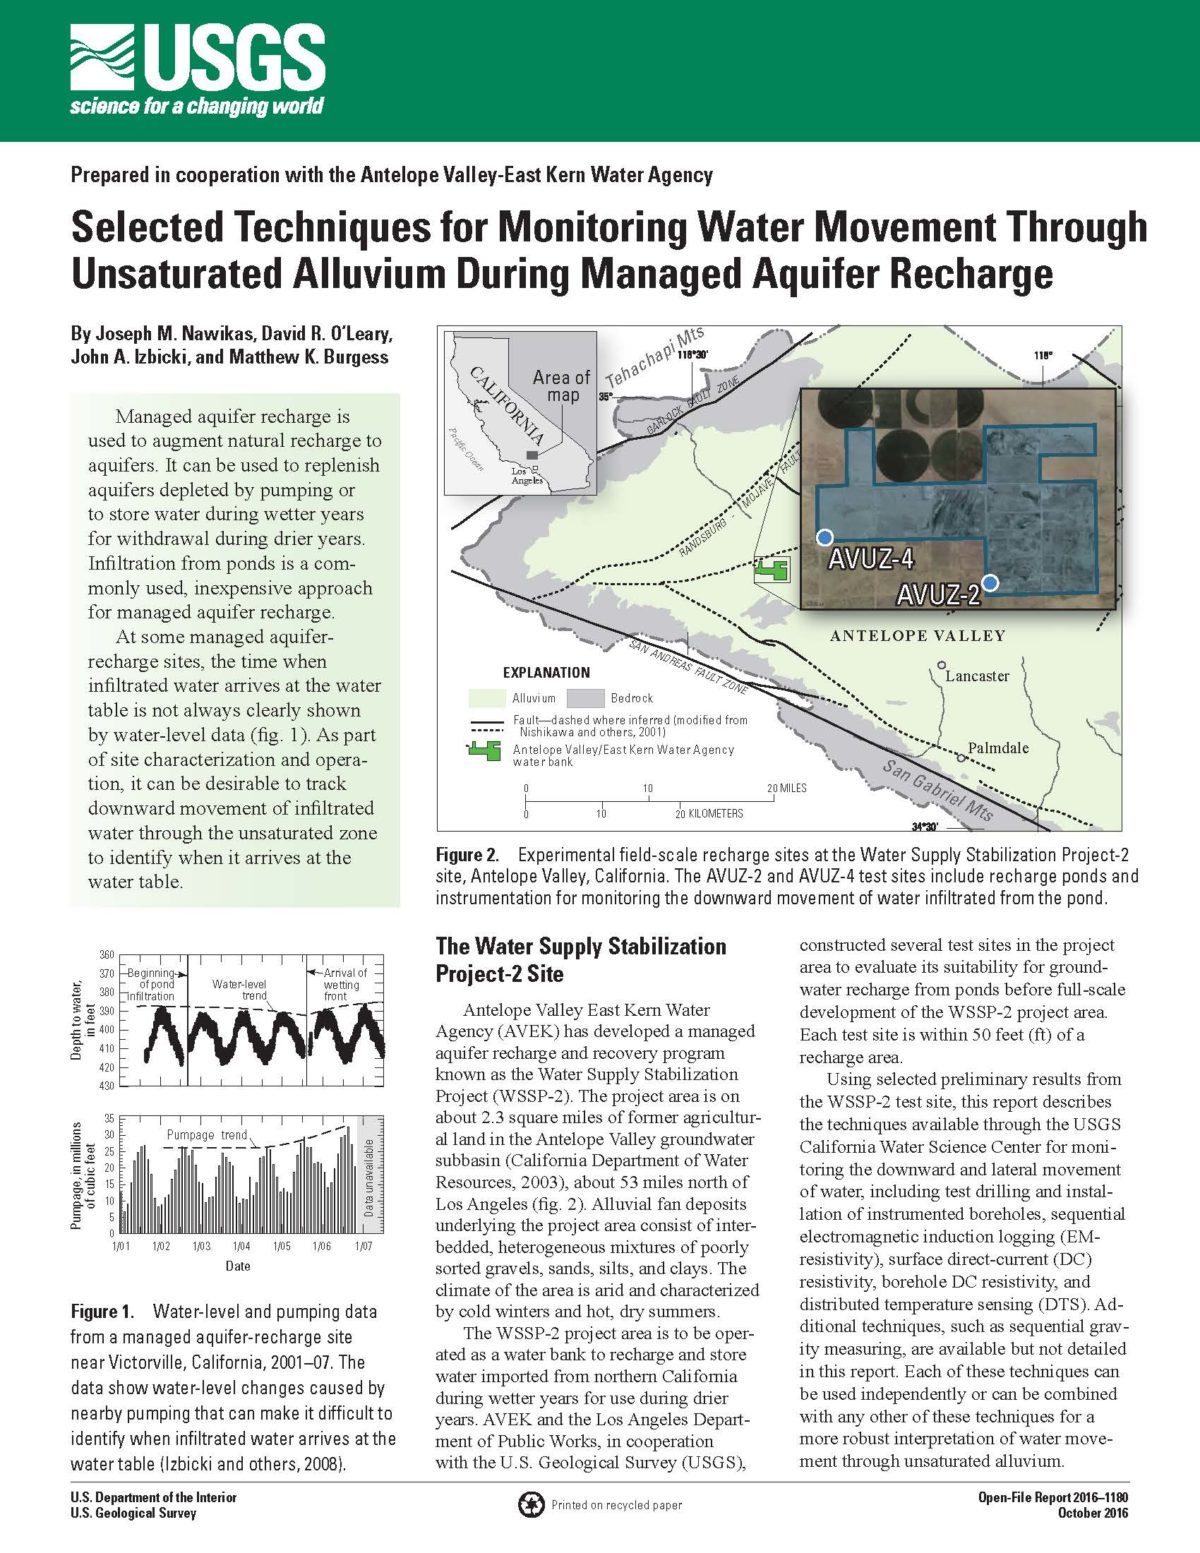 Selected Techniques for Monitoring Water Movement Through Unsaturated Alluvium During Managed Aquifer Recharge